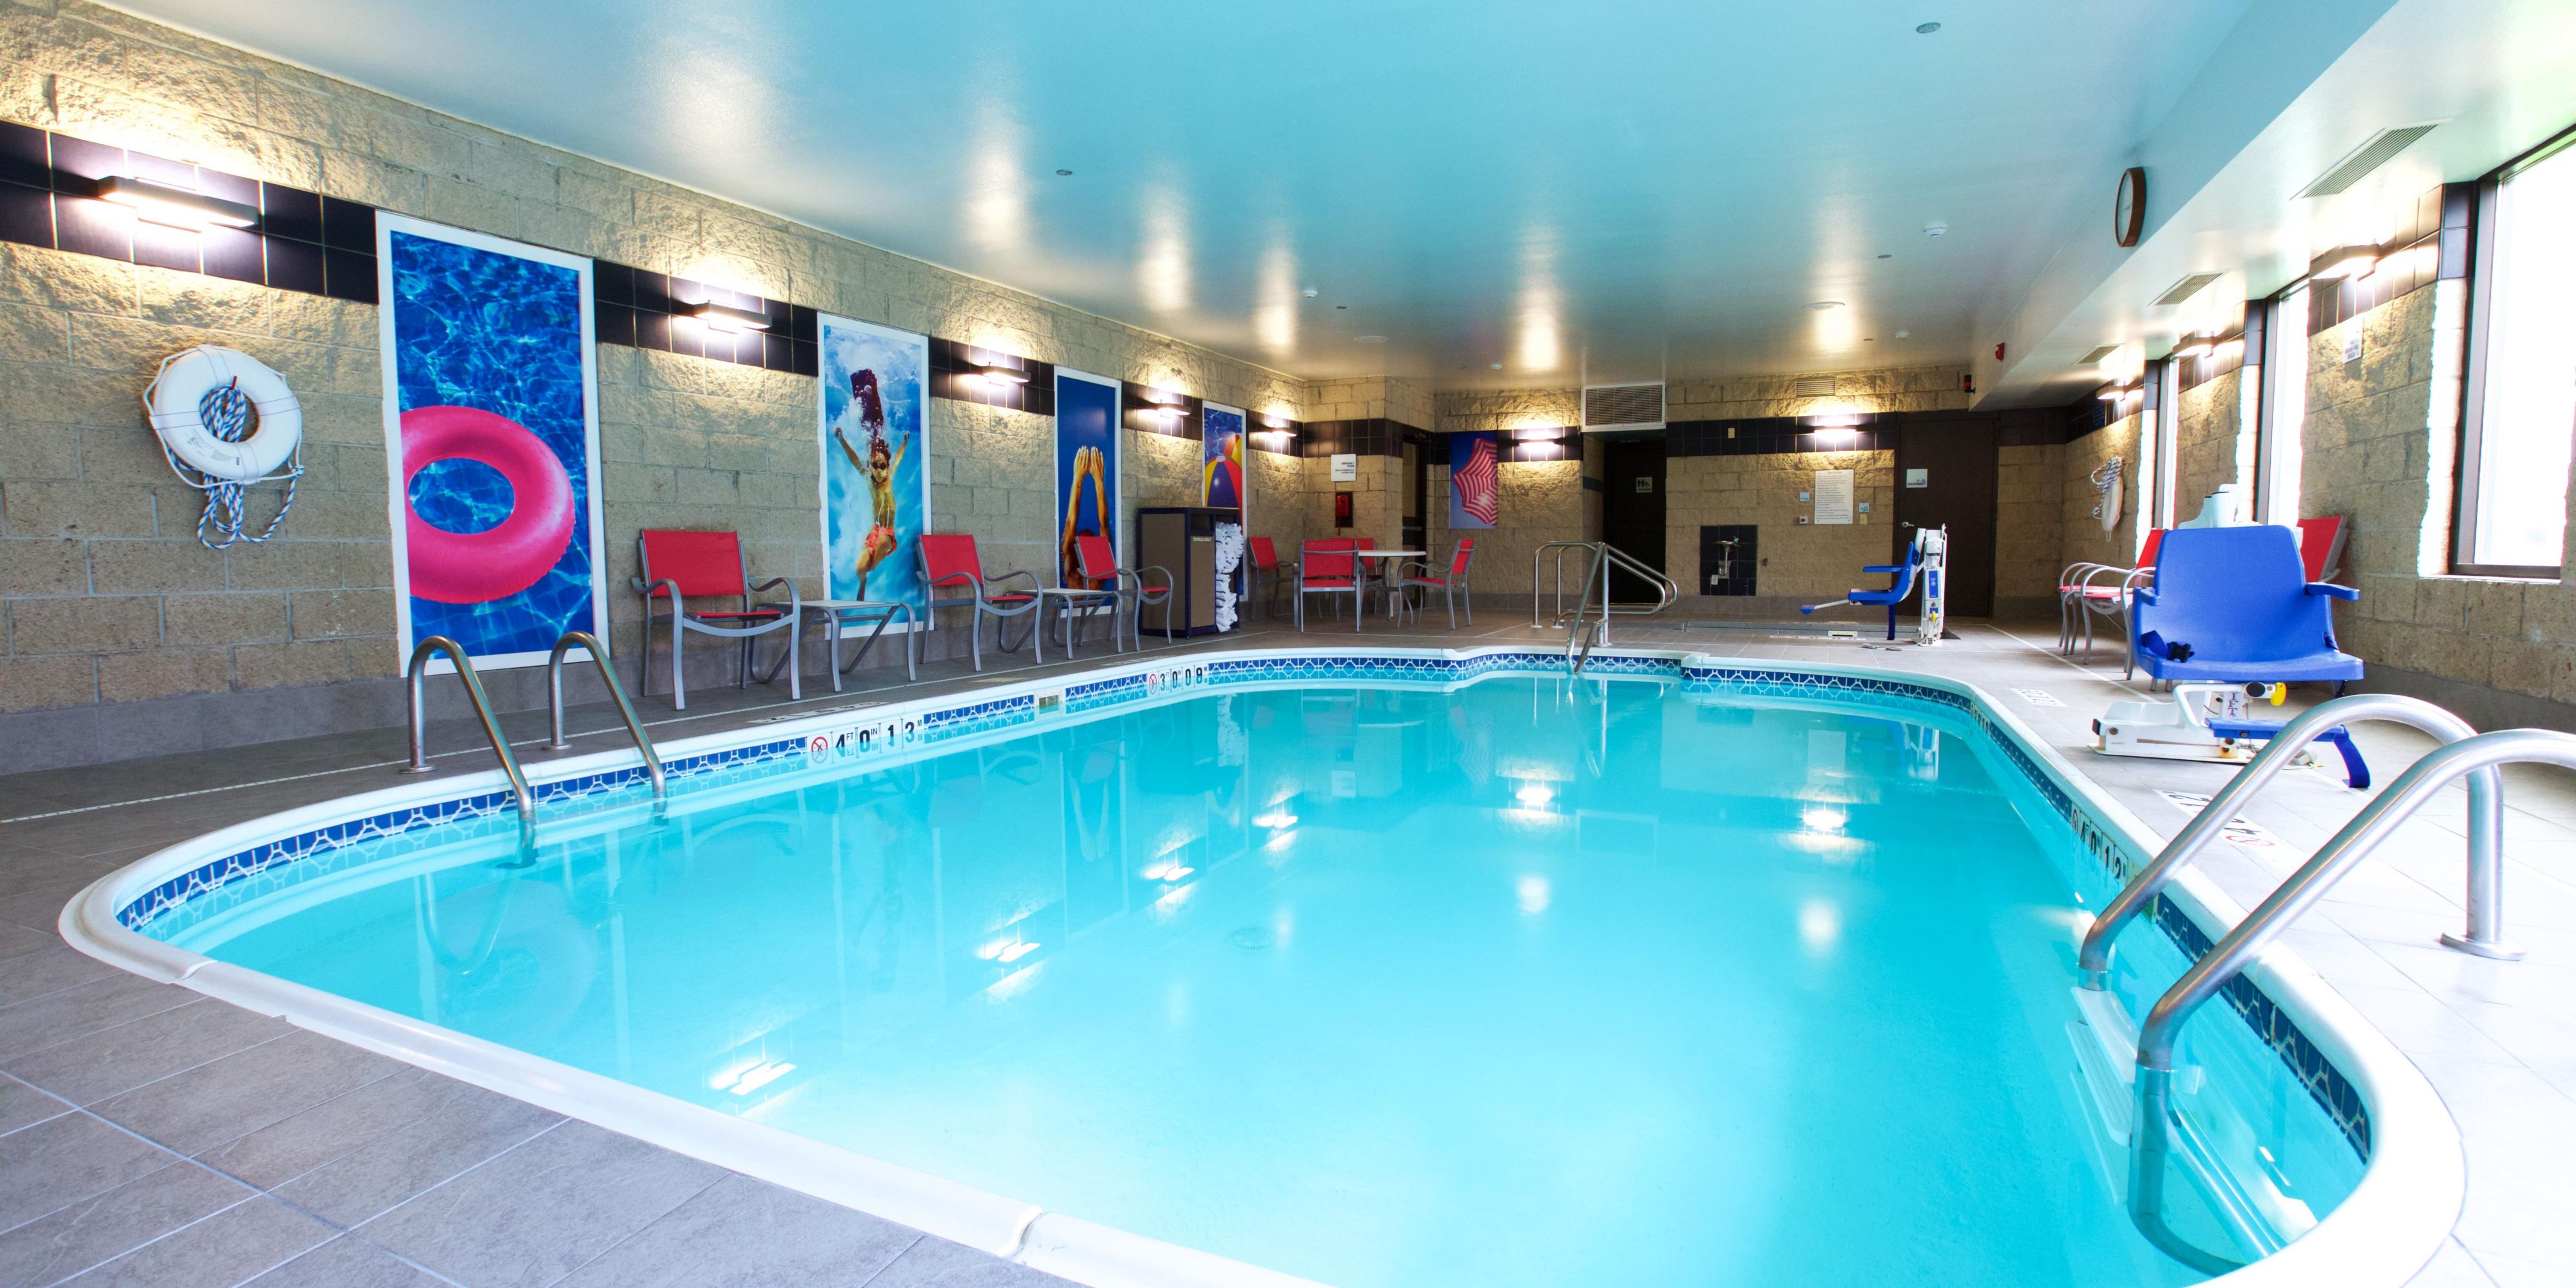 Our indoor heated pool and indoor whirlpool are great relaxing places for guests day or night!